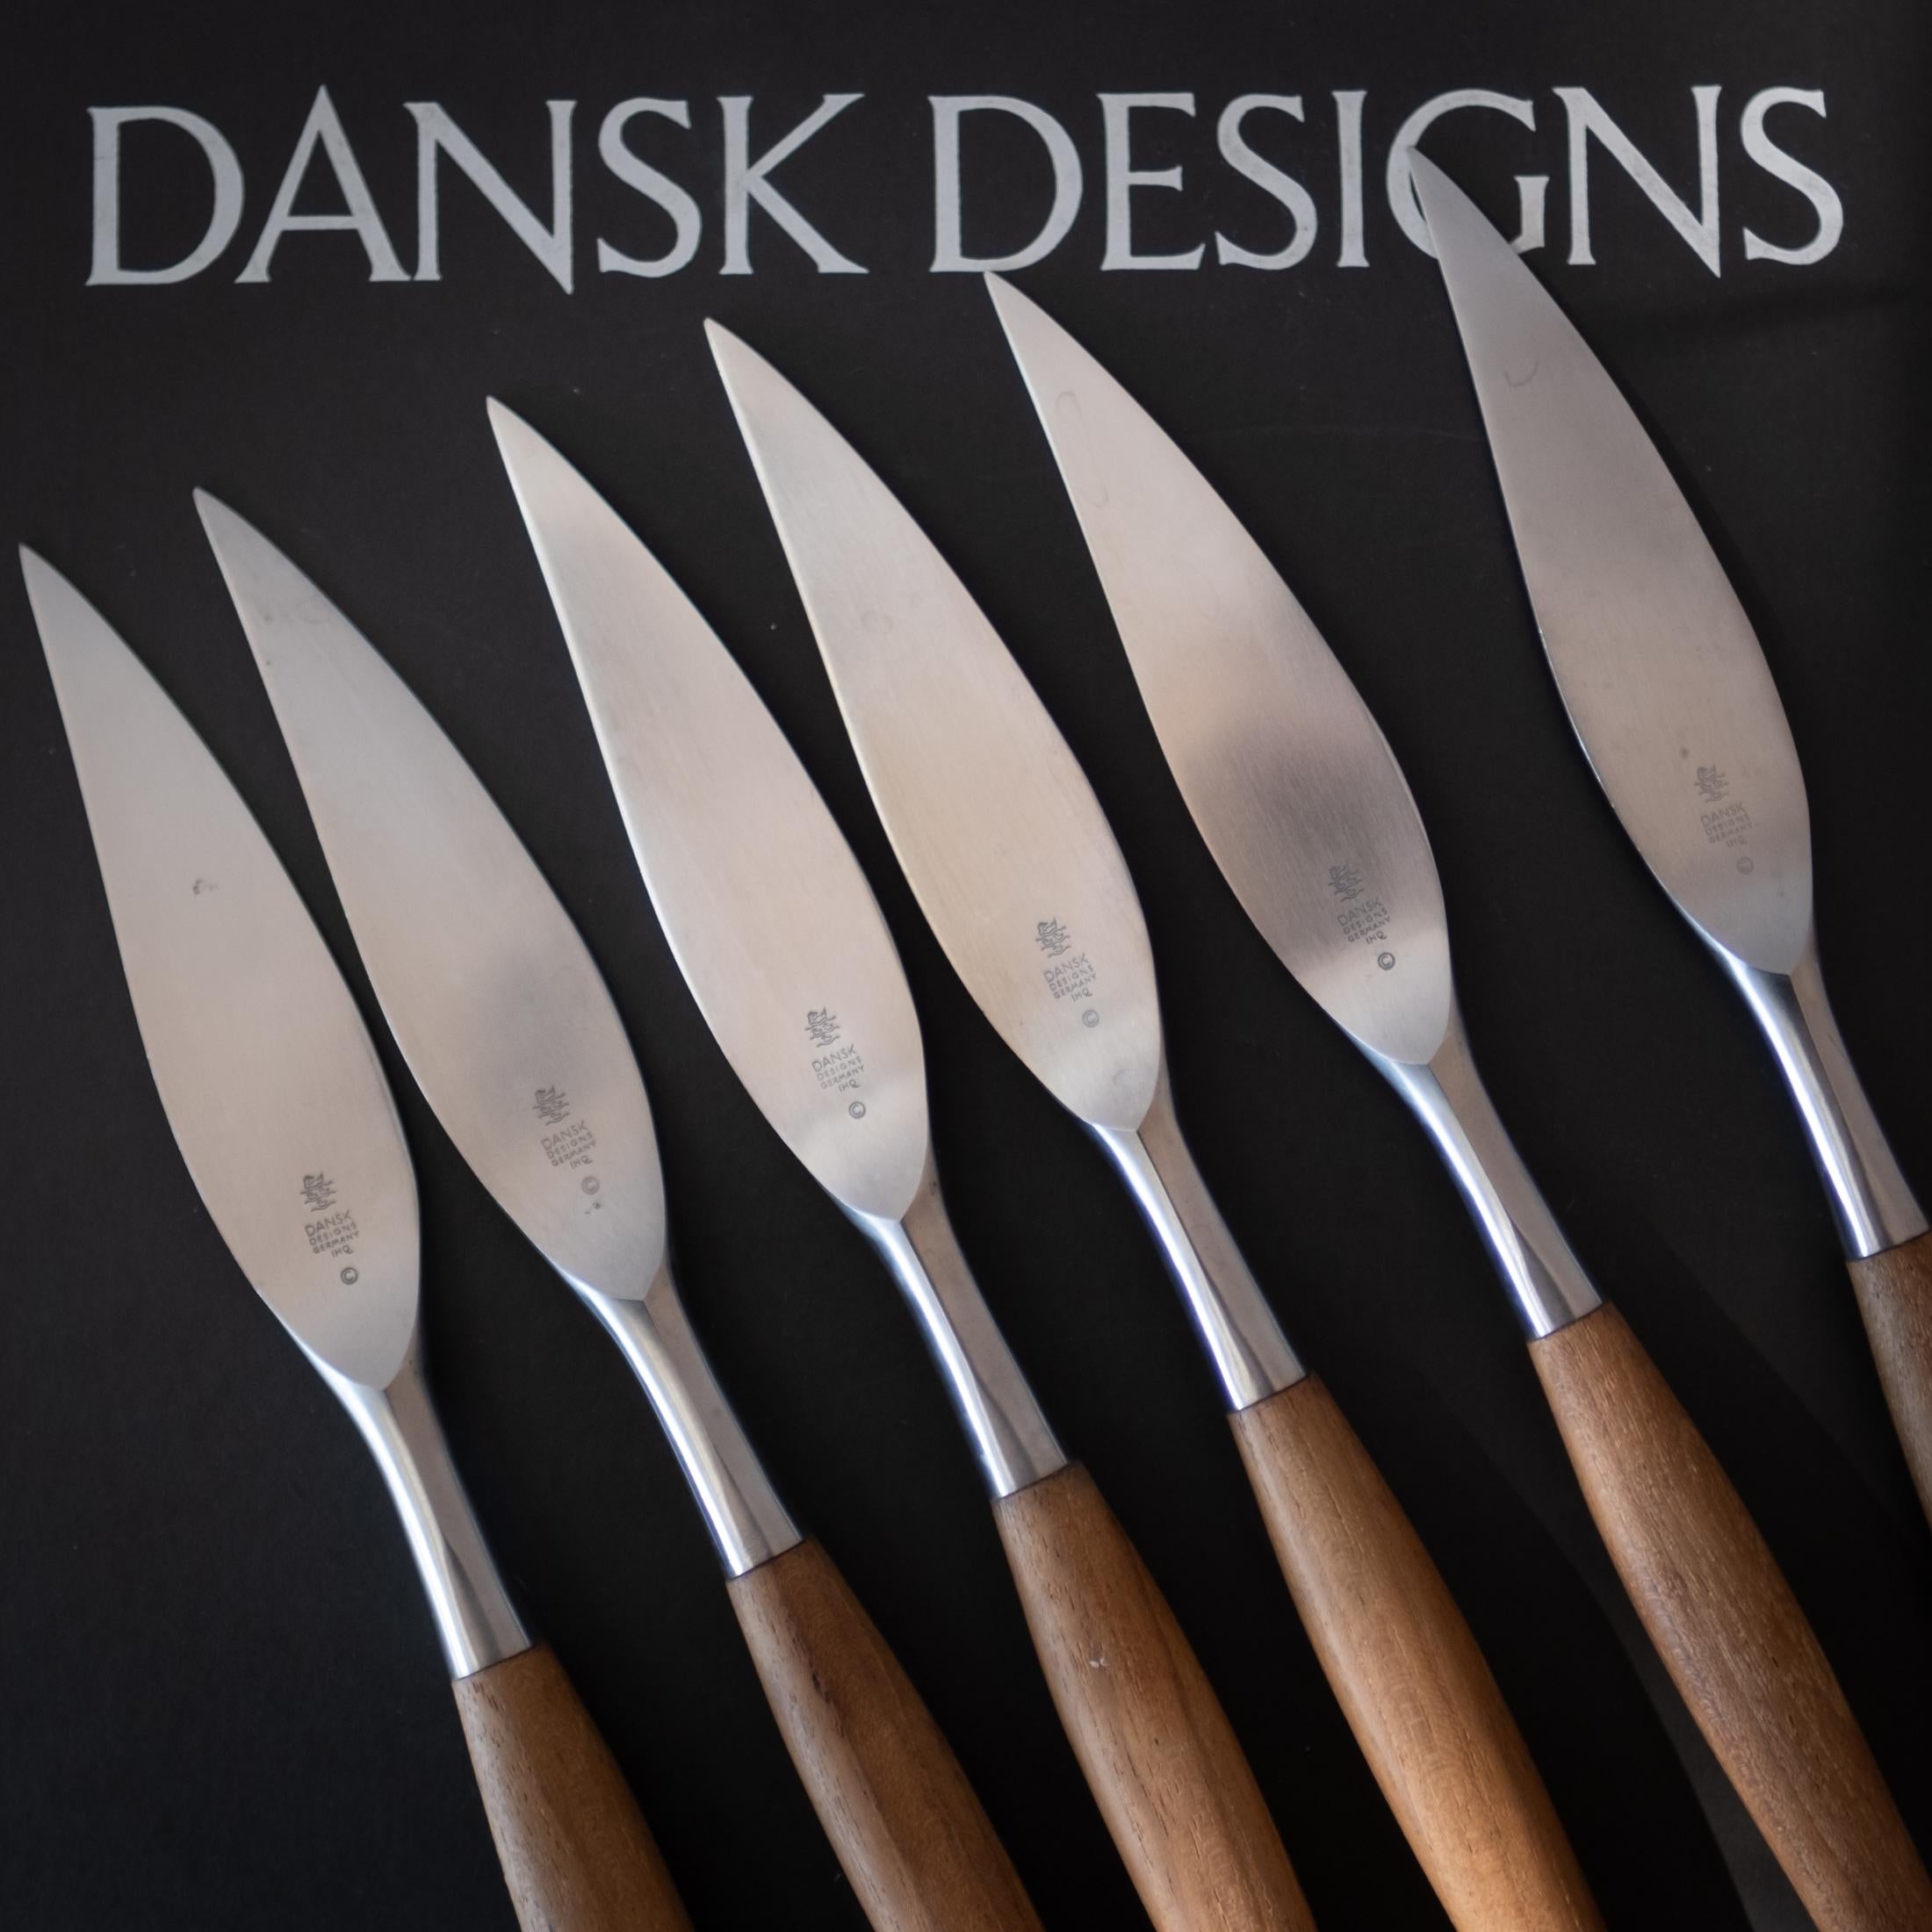 A set of 6 teak and stainless Fjord steak knives, designed in the 1950s by Jens Quistgaard for Dansk. They look barely used. Comes with the box and original plastic sleeves. This design is part of the Museum of Modern Art's permanent collection.